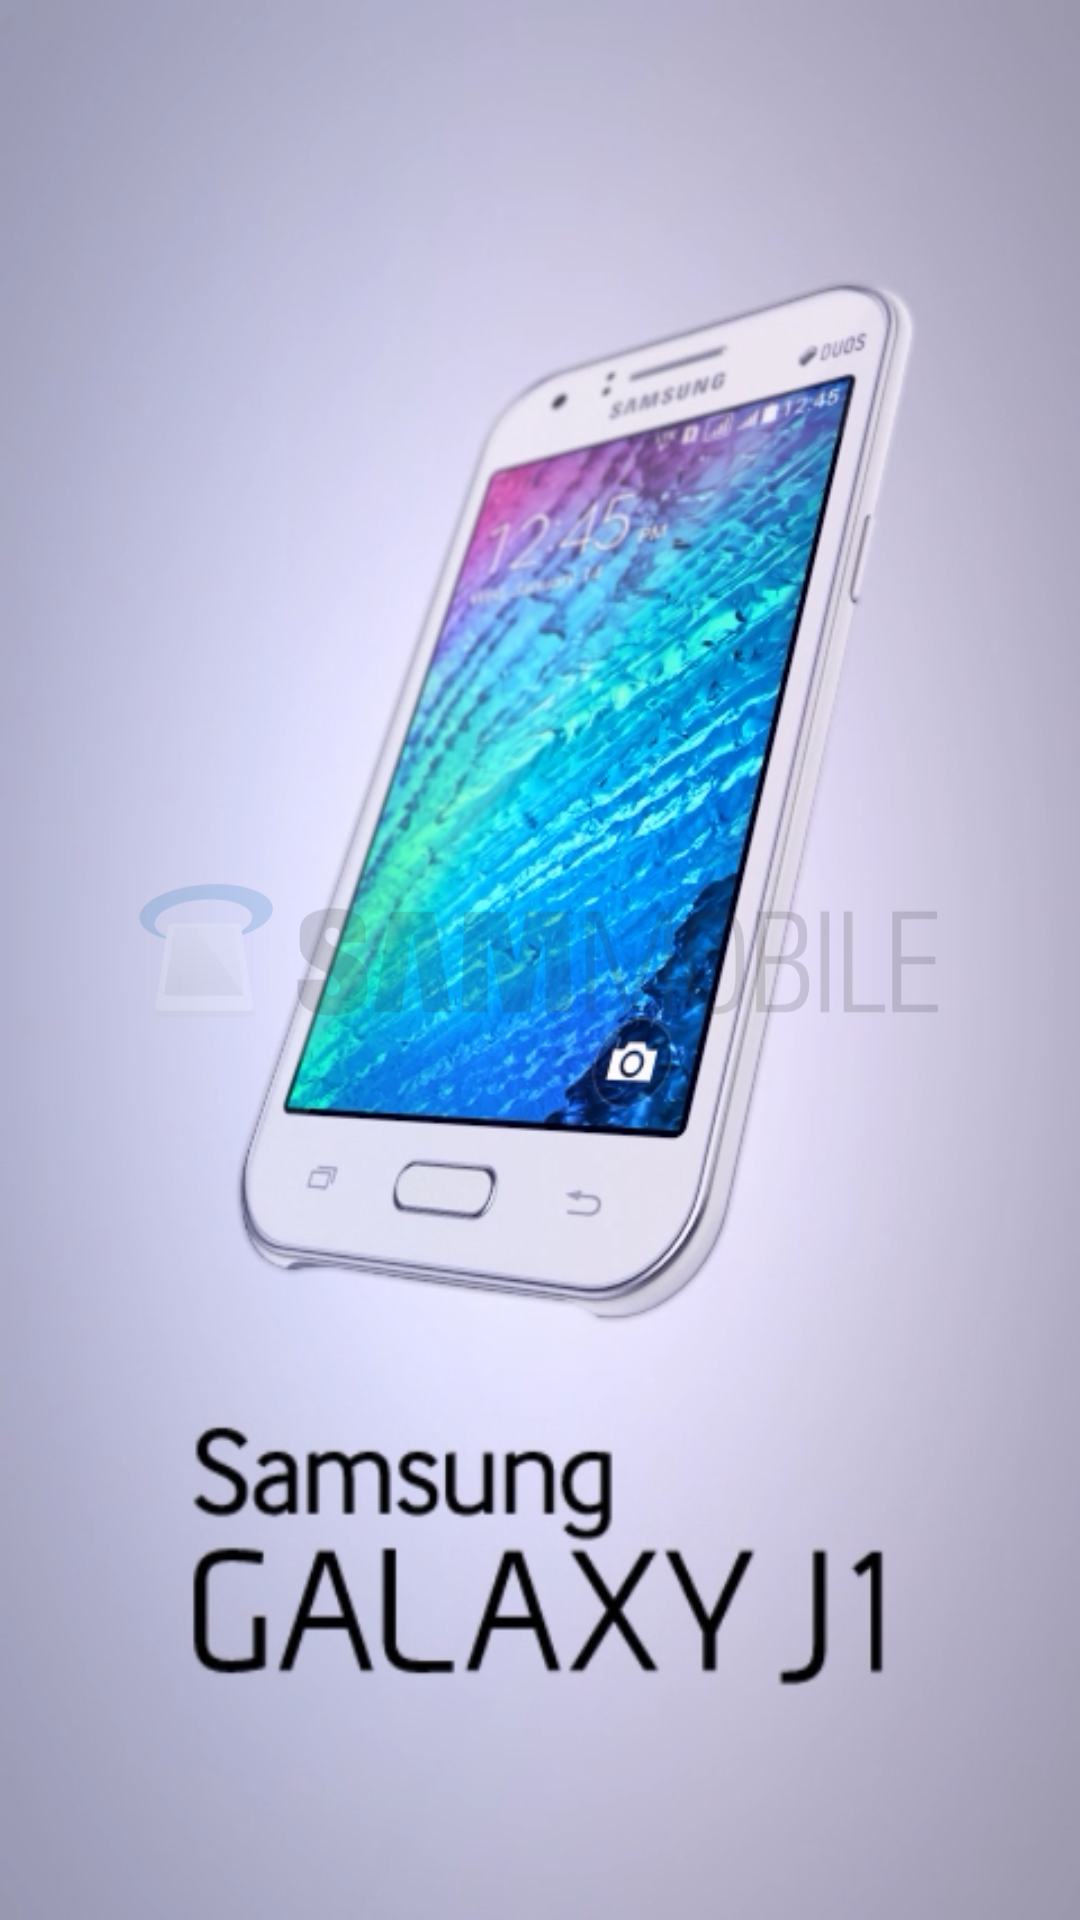 Samsung Galaxy J1 Wallpapers And Firmwares Now Online Sammobile Sammobile